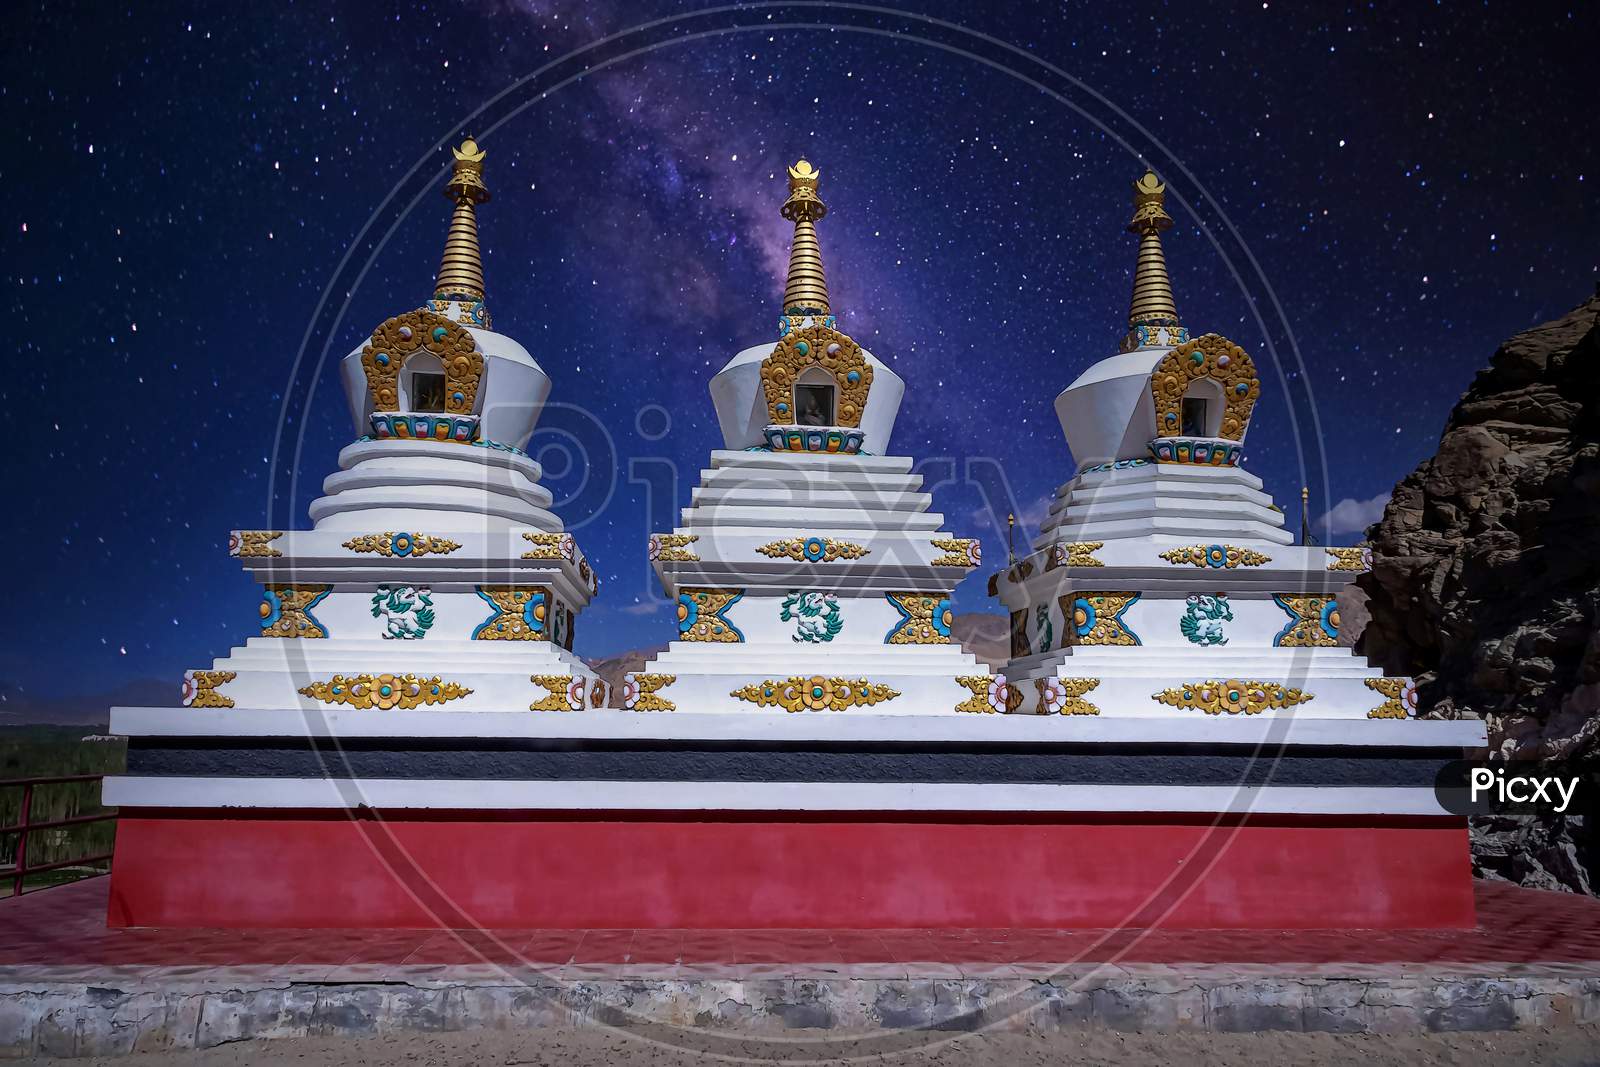 White painted stupas holding buddhist relics under a starry sky as seen at the Thikse Monastery near Leh city, Ladakh, India